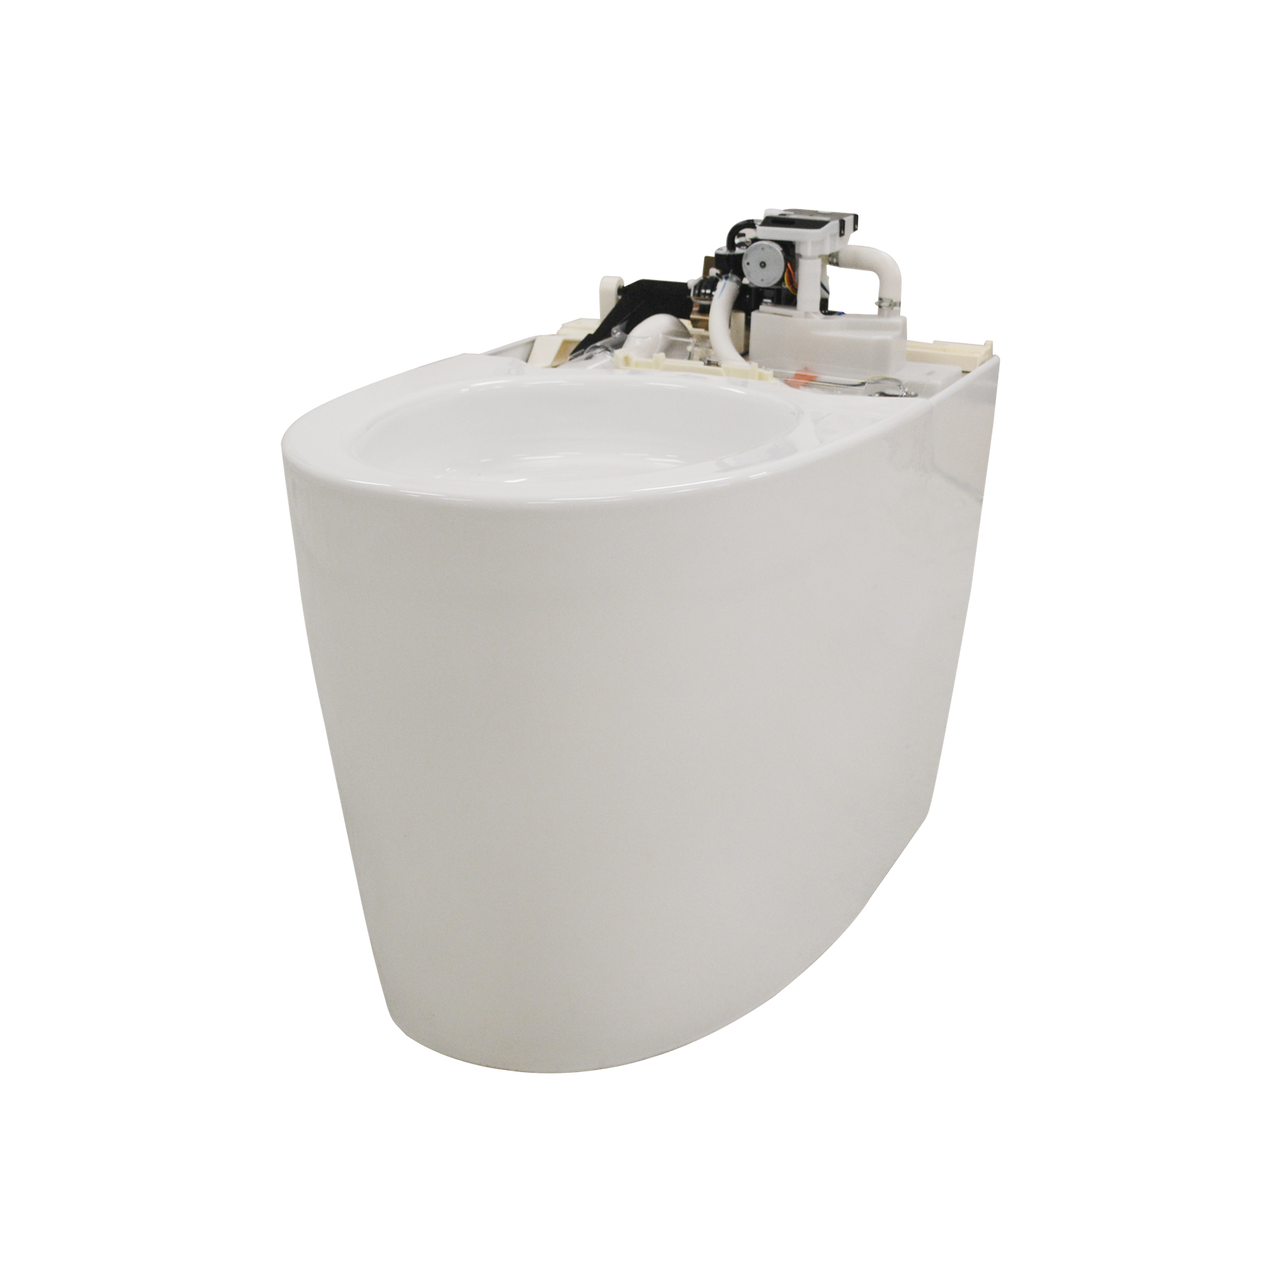 NEOREST Dual Flush 1.0 or 0.8 GPF Elongated Toilet Bowl for AH and RH, - CT989CUMFG#12 - BNGBath